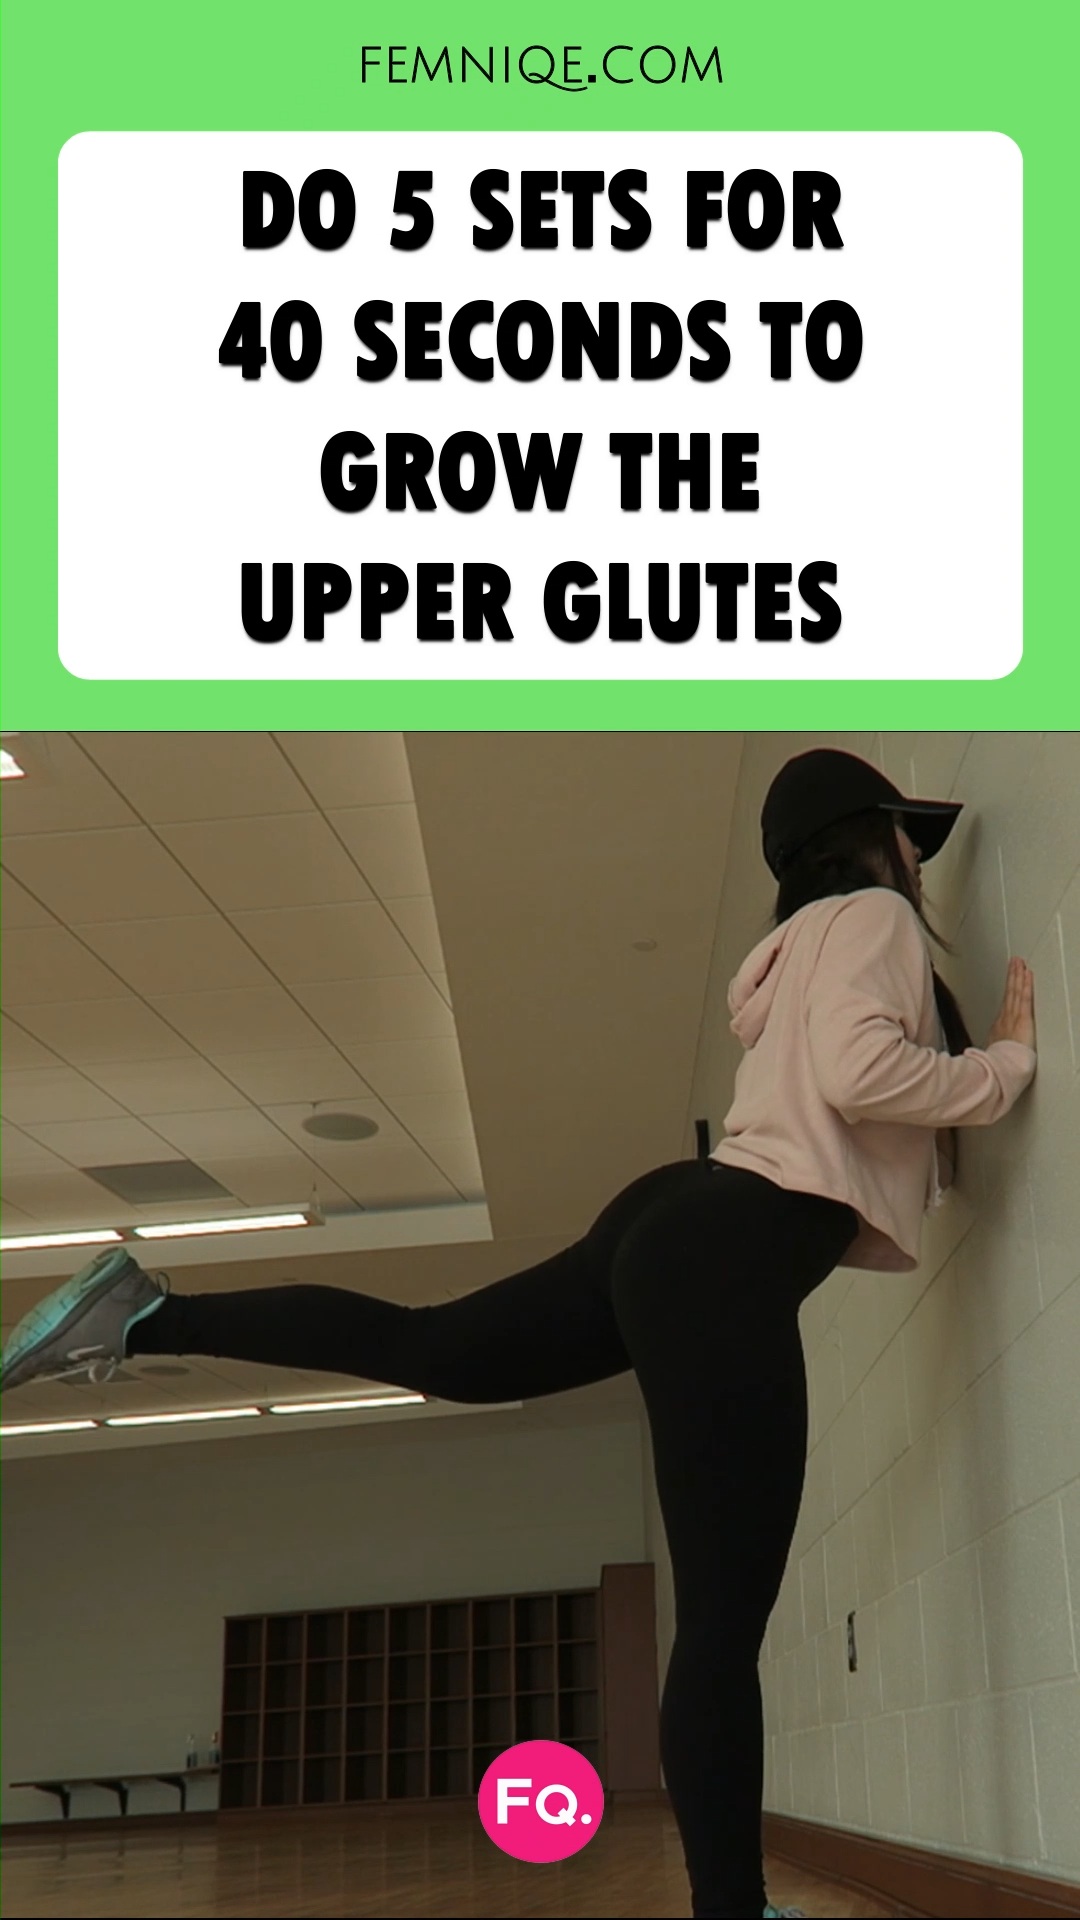 Upper Glutes Workout: Do 5 Sets For 40 Seconds - Upper Glutes Workout: Do 5 Sets For 40 Seconds -   17 fitness Training routine ideas